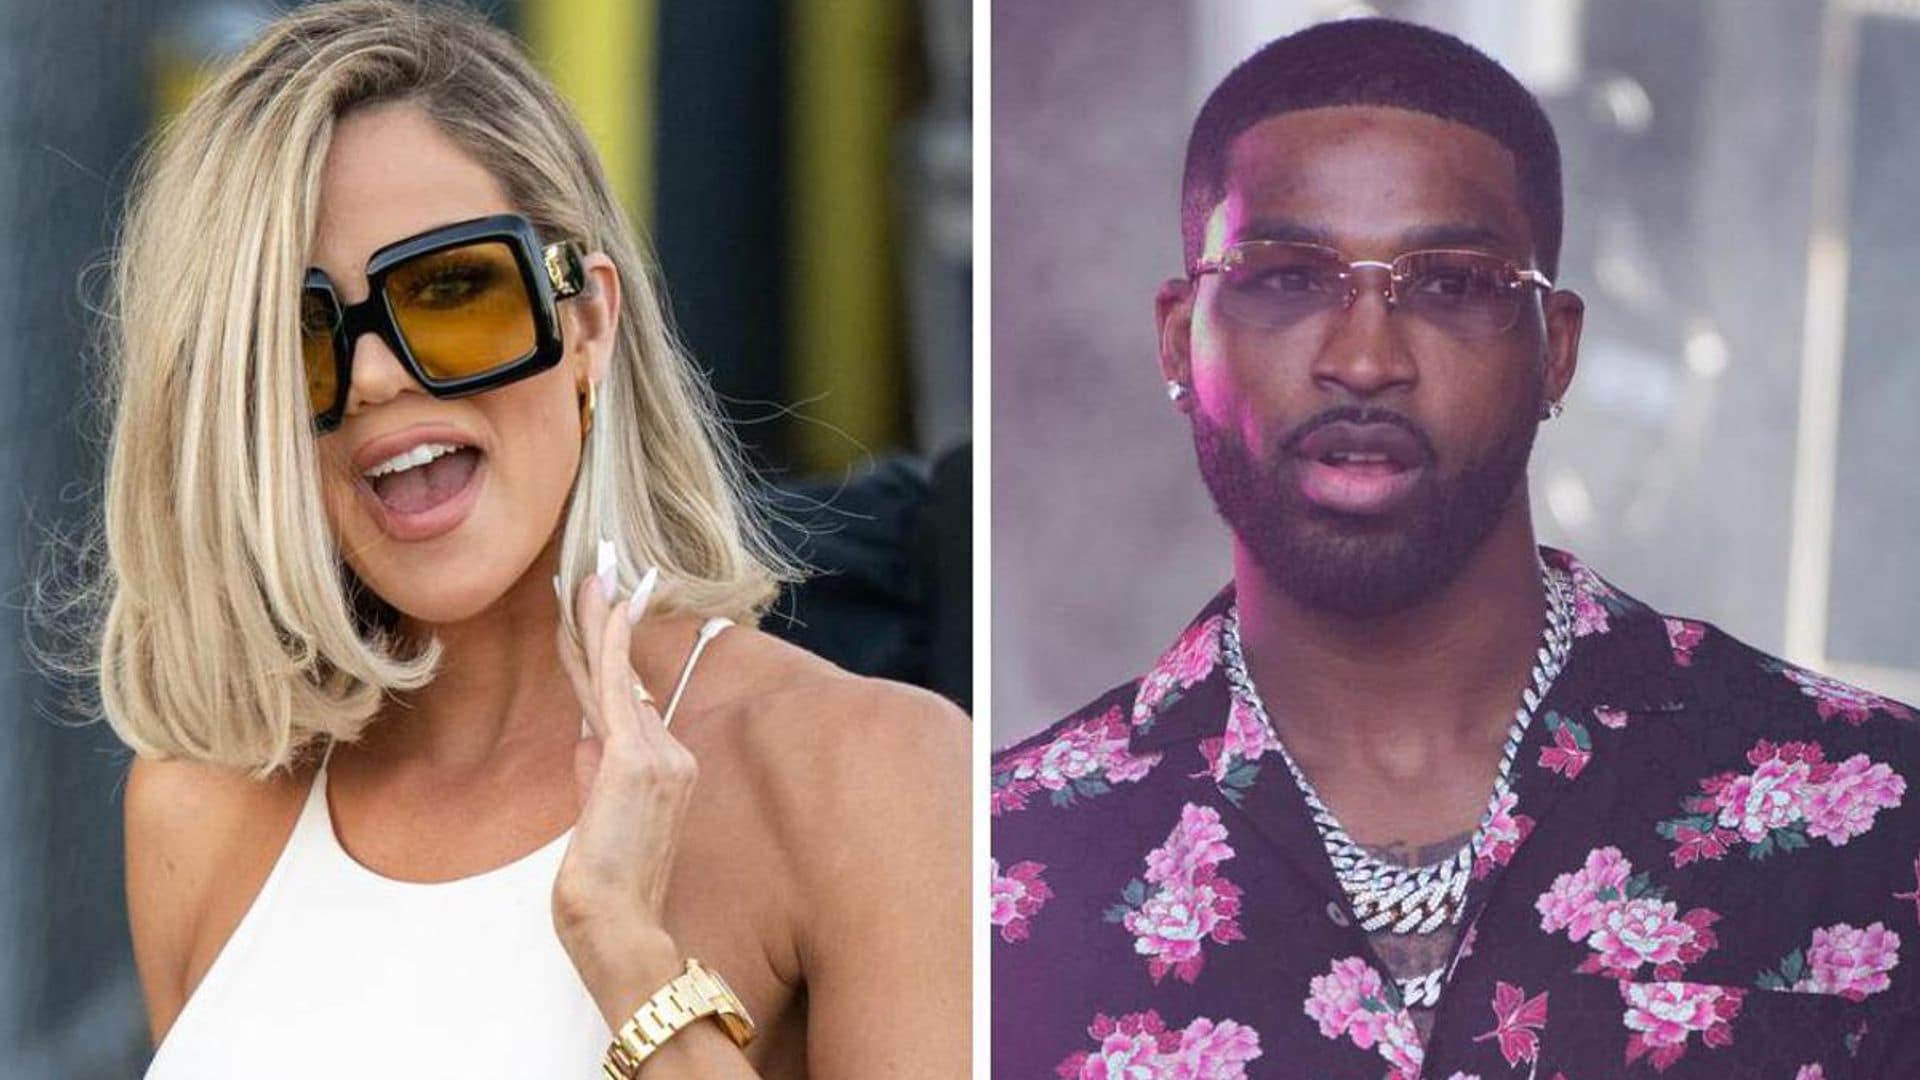 Khloé Kardashian confirms she’s expecting her second child with Tristan Thompson